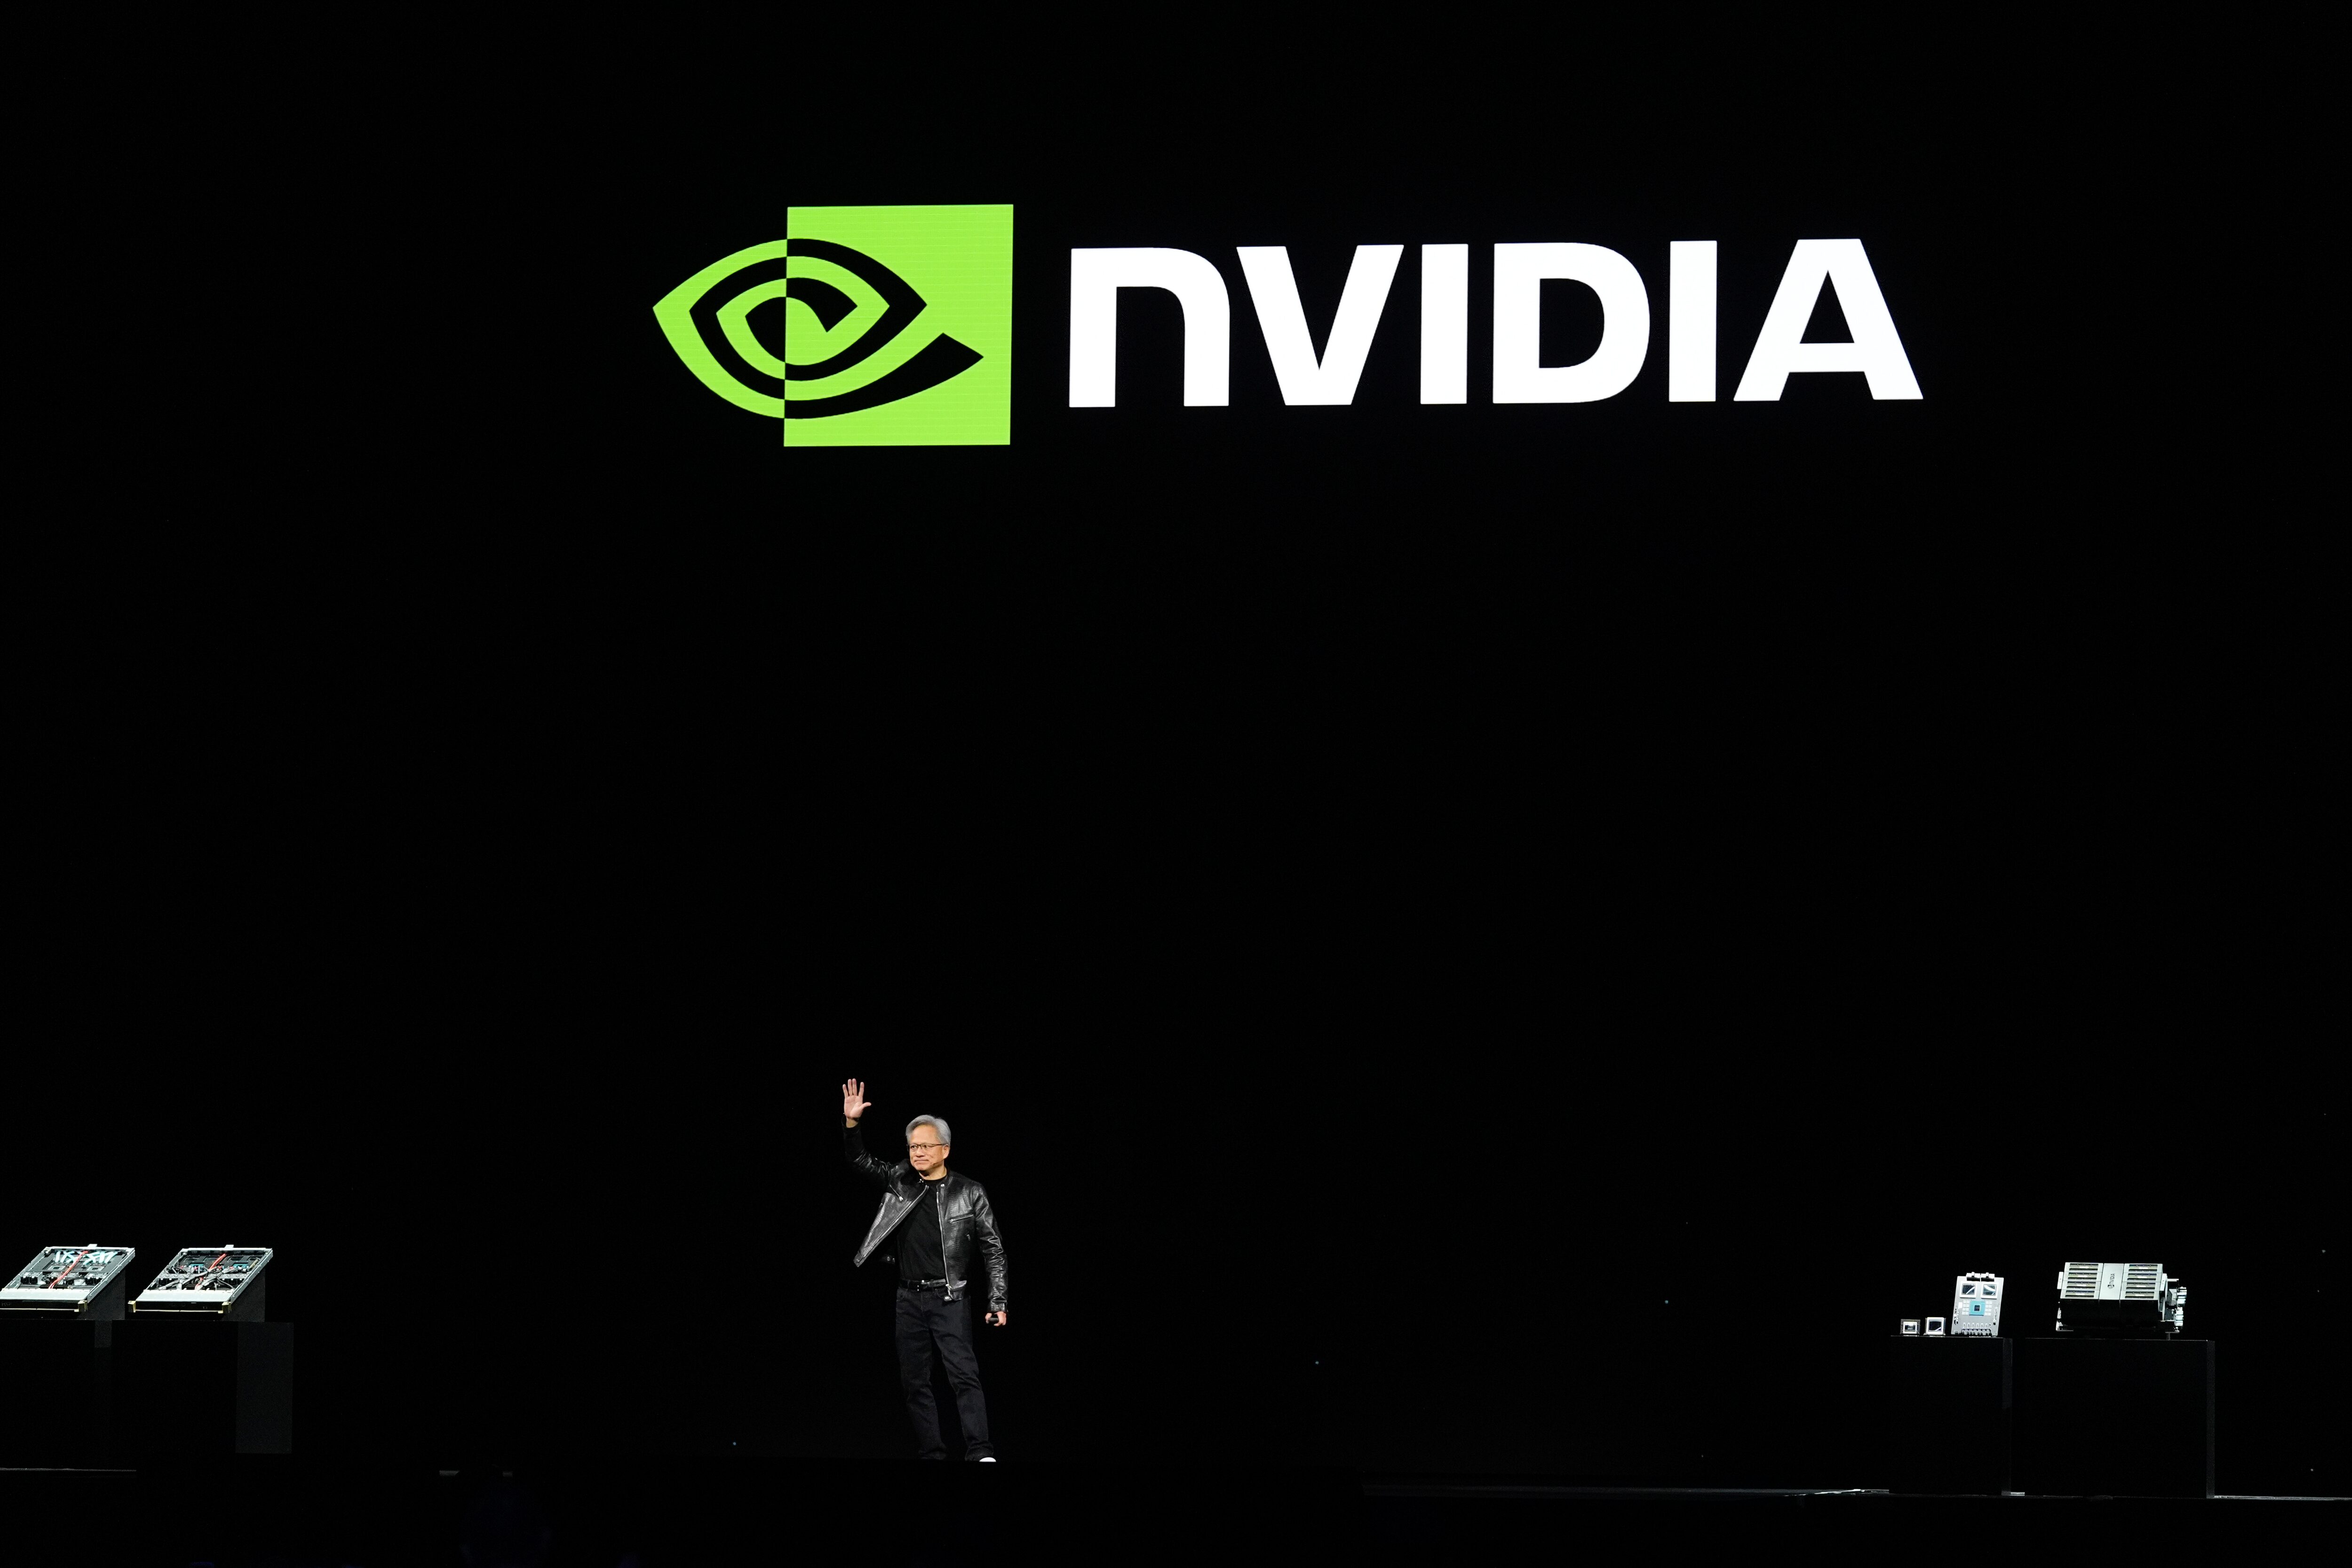 Experiencing Nvidia FOMO? You’ve got two choices